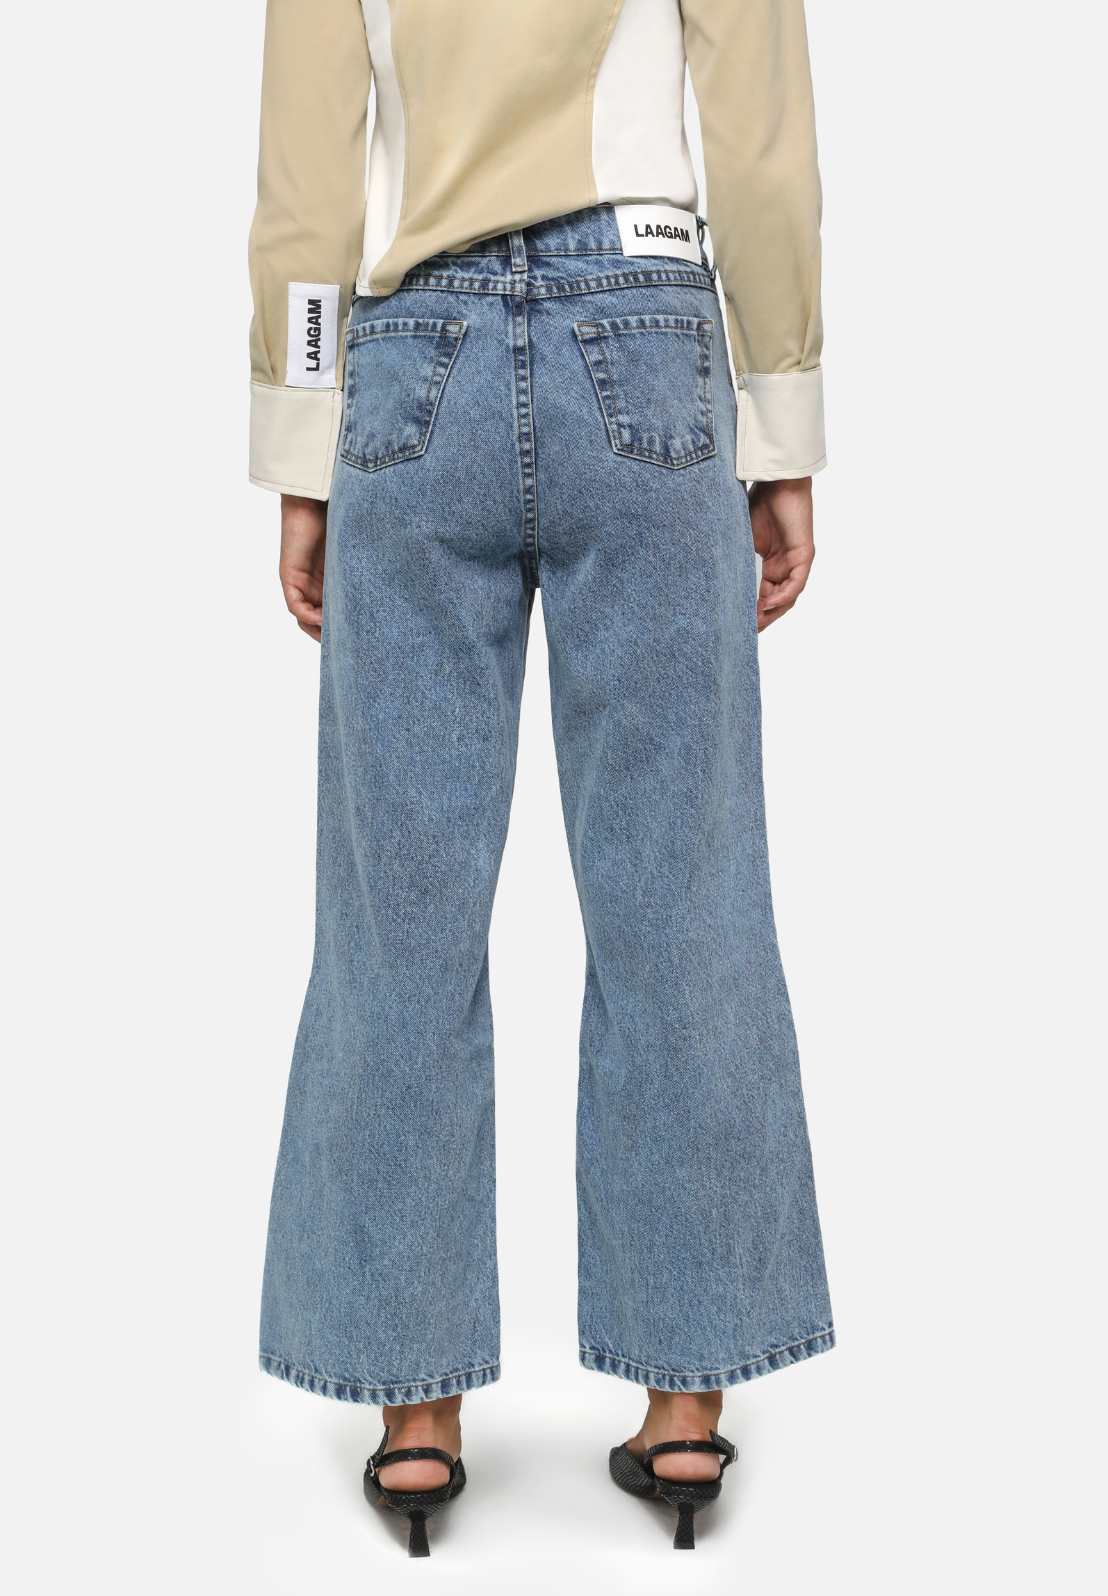 Thelma Low Waist Crop Jeans